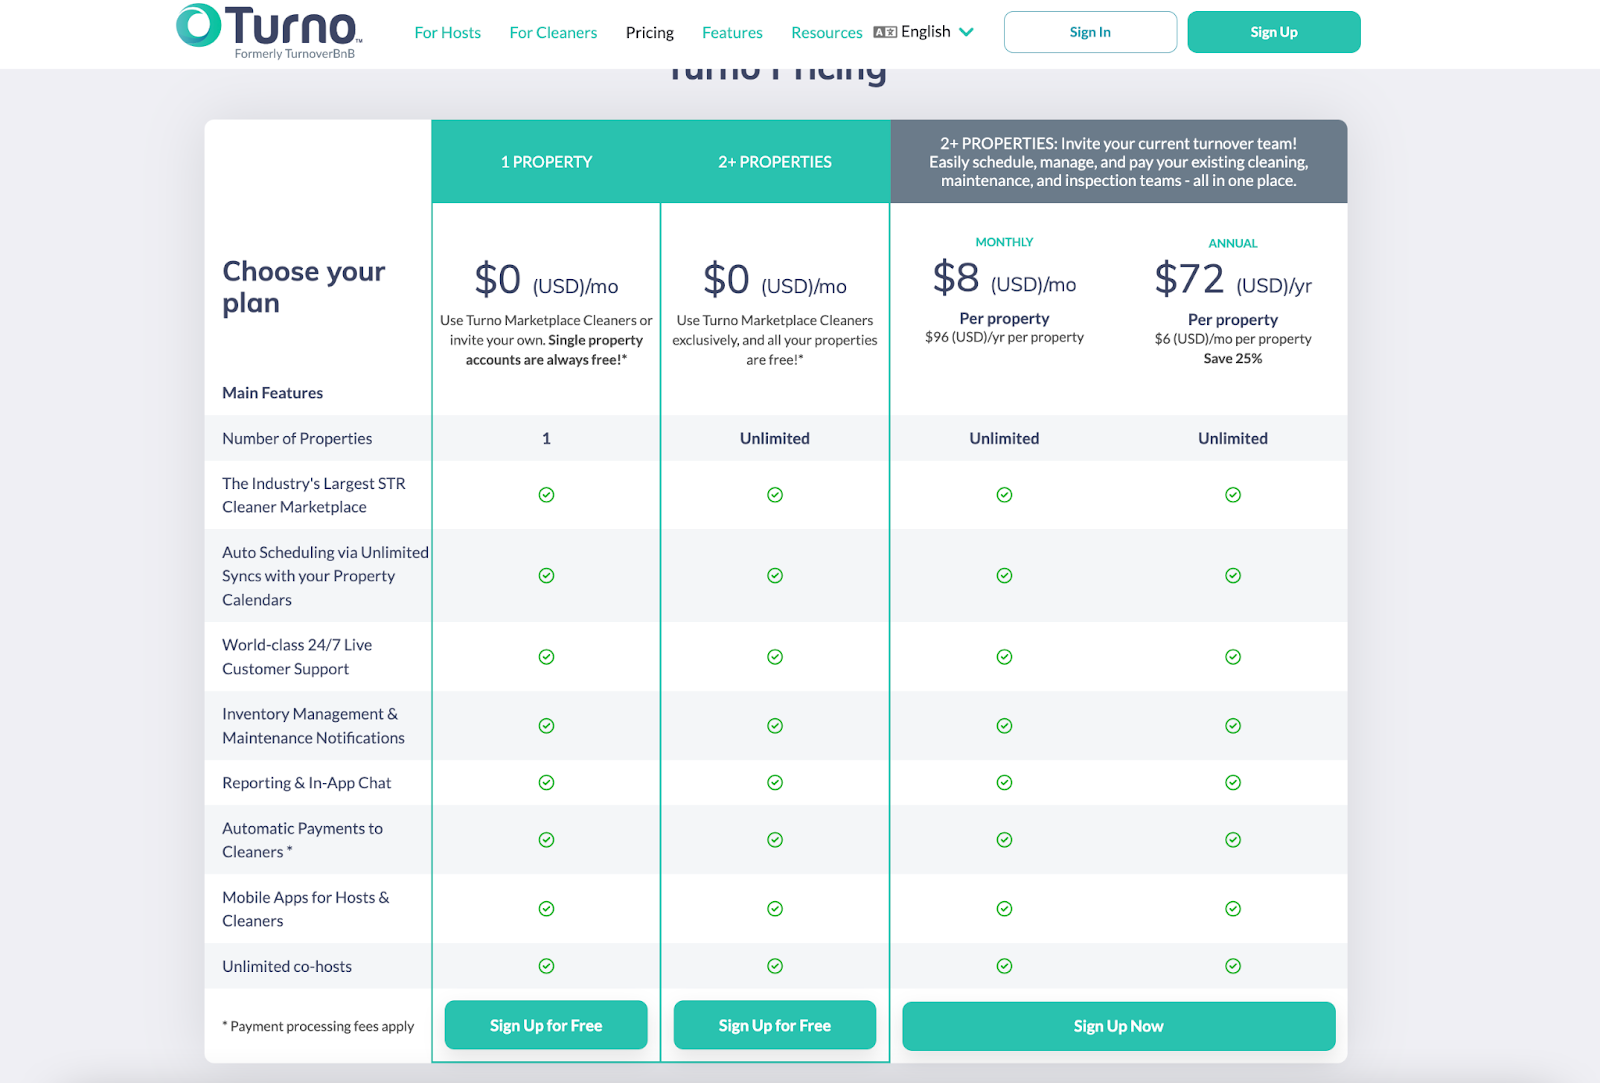 Learn more about the cost of Turno